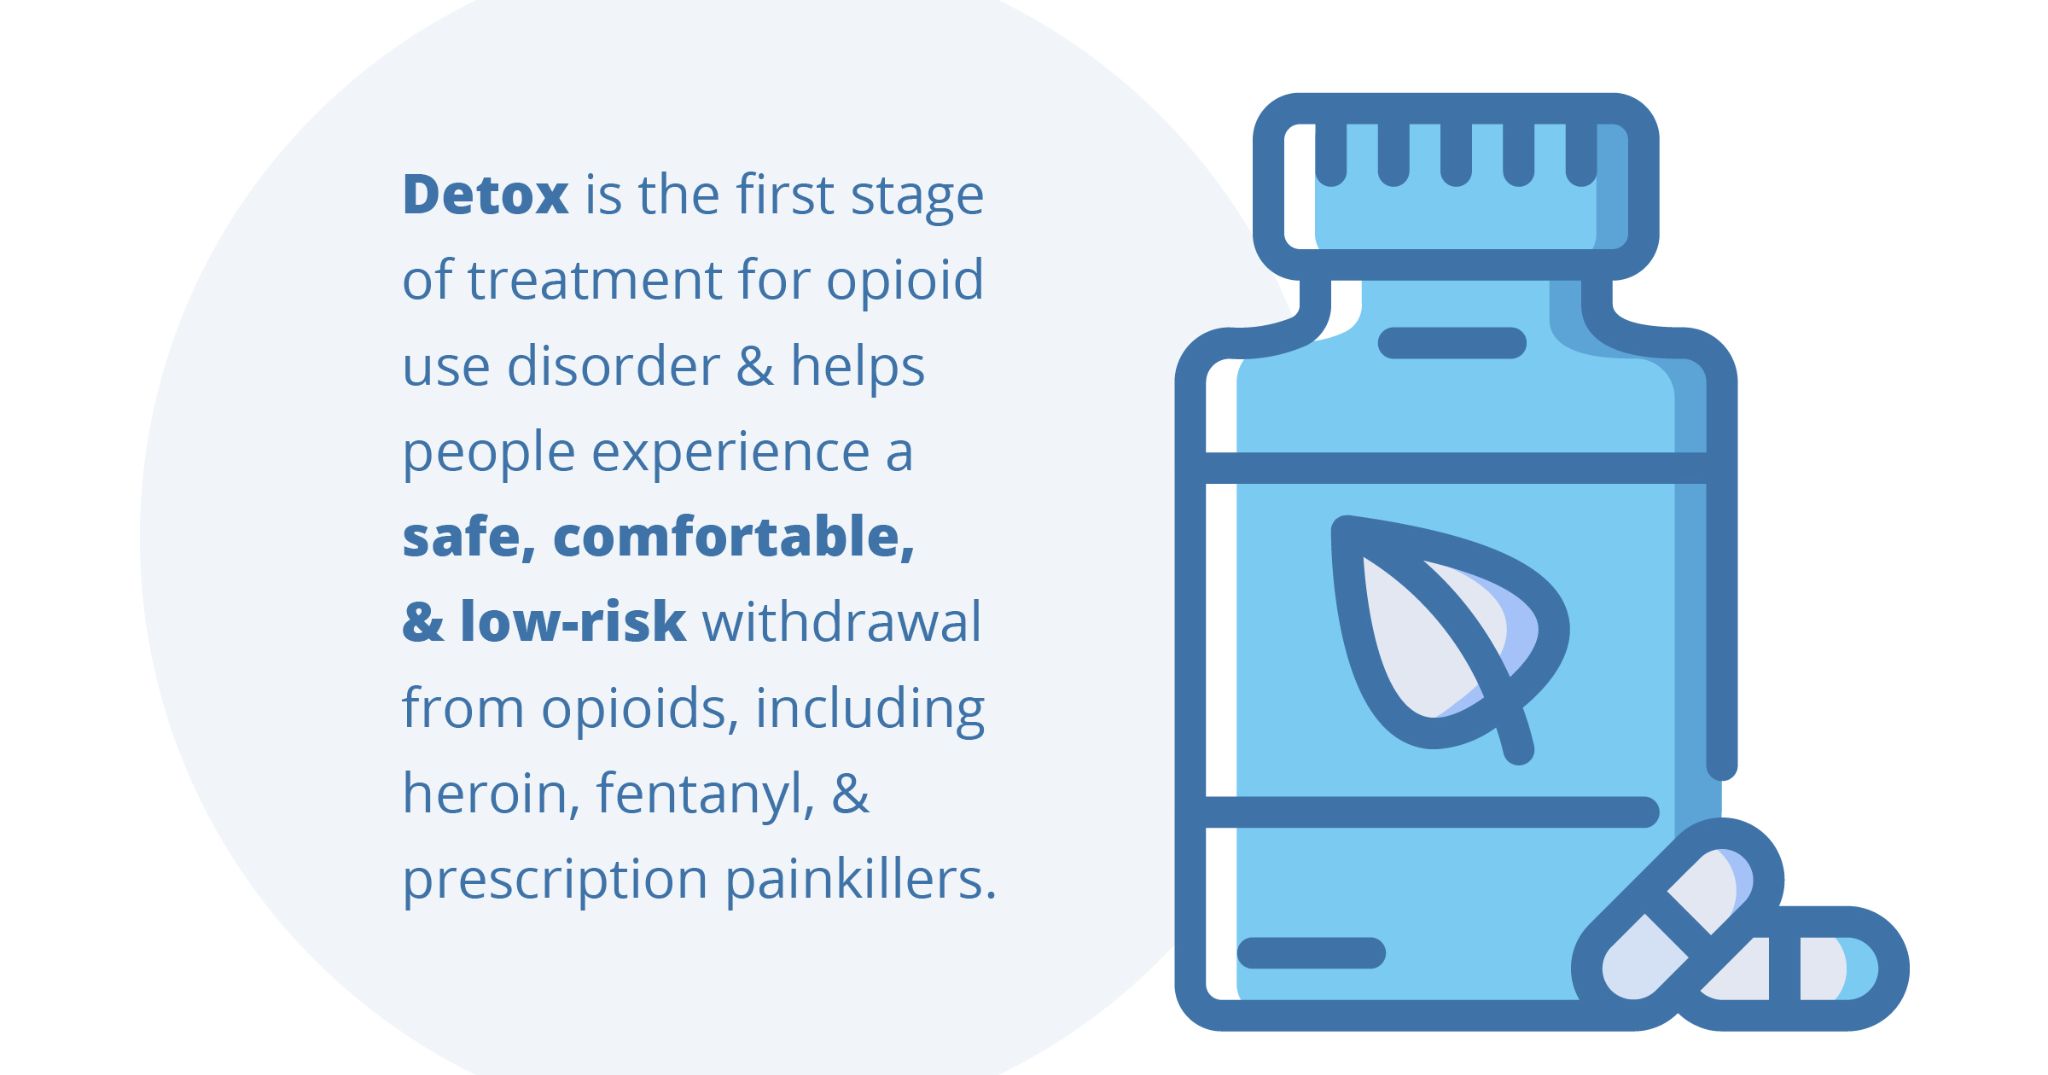 Detox is the first stage of treatment for opioid use disorder & helps people experience a safe, comfortable, & low risk withdrawal from opioids, including heroin, fentanyl, & prescription painkillers.